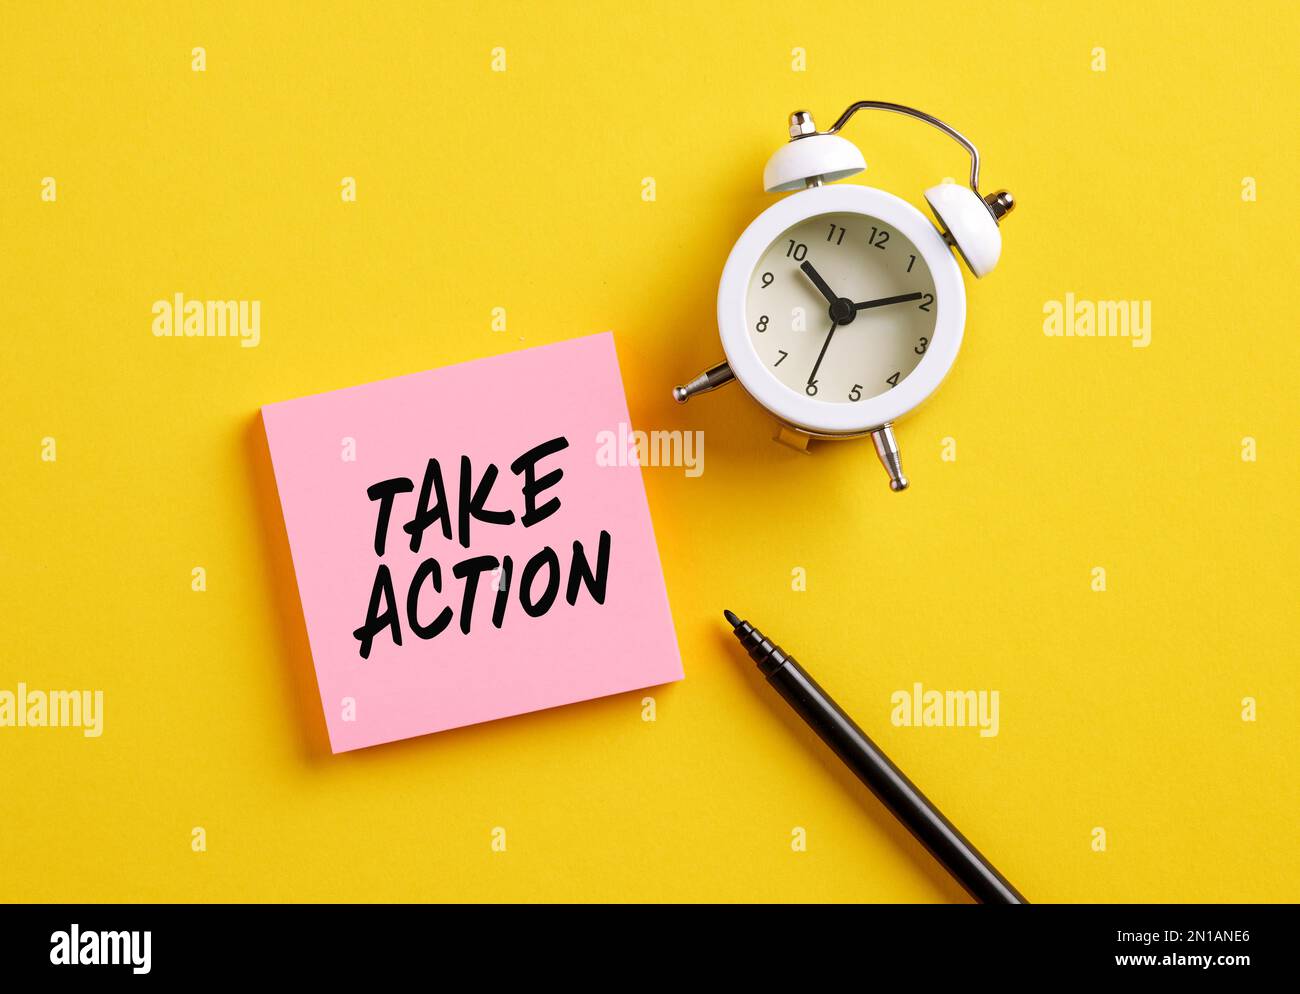 Take action message on pink note paper with alarm clock and pen. Motivational message for taking action in business or life concept. Stock Photo